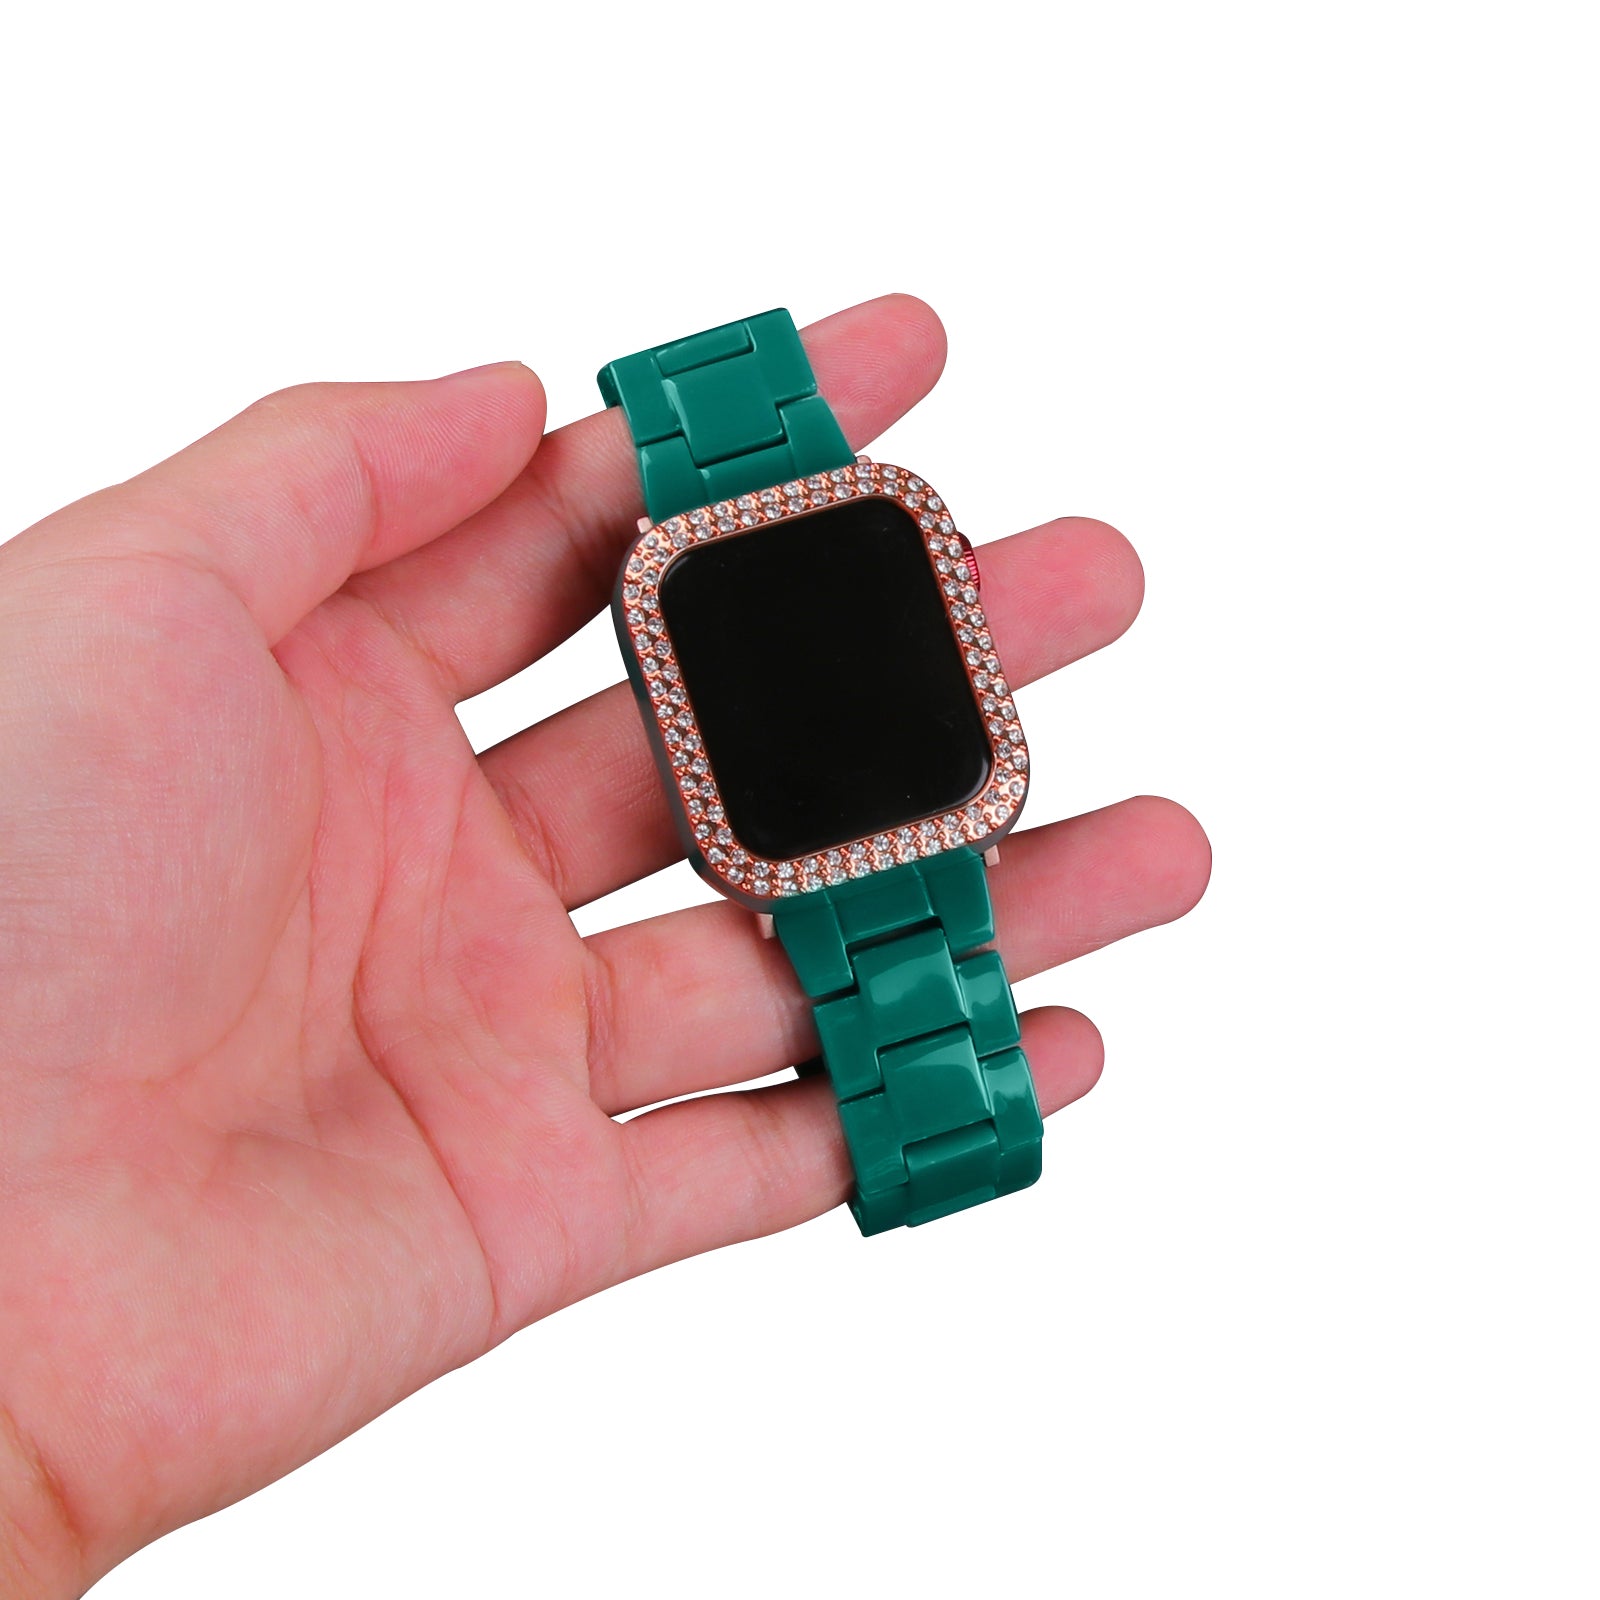 TEEPOLLO Green Resin Apple Watch Band Strap for Women